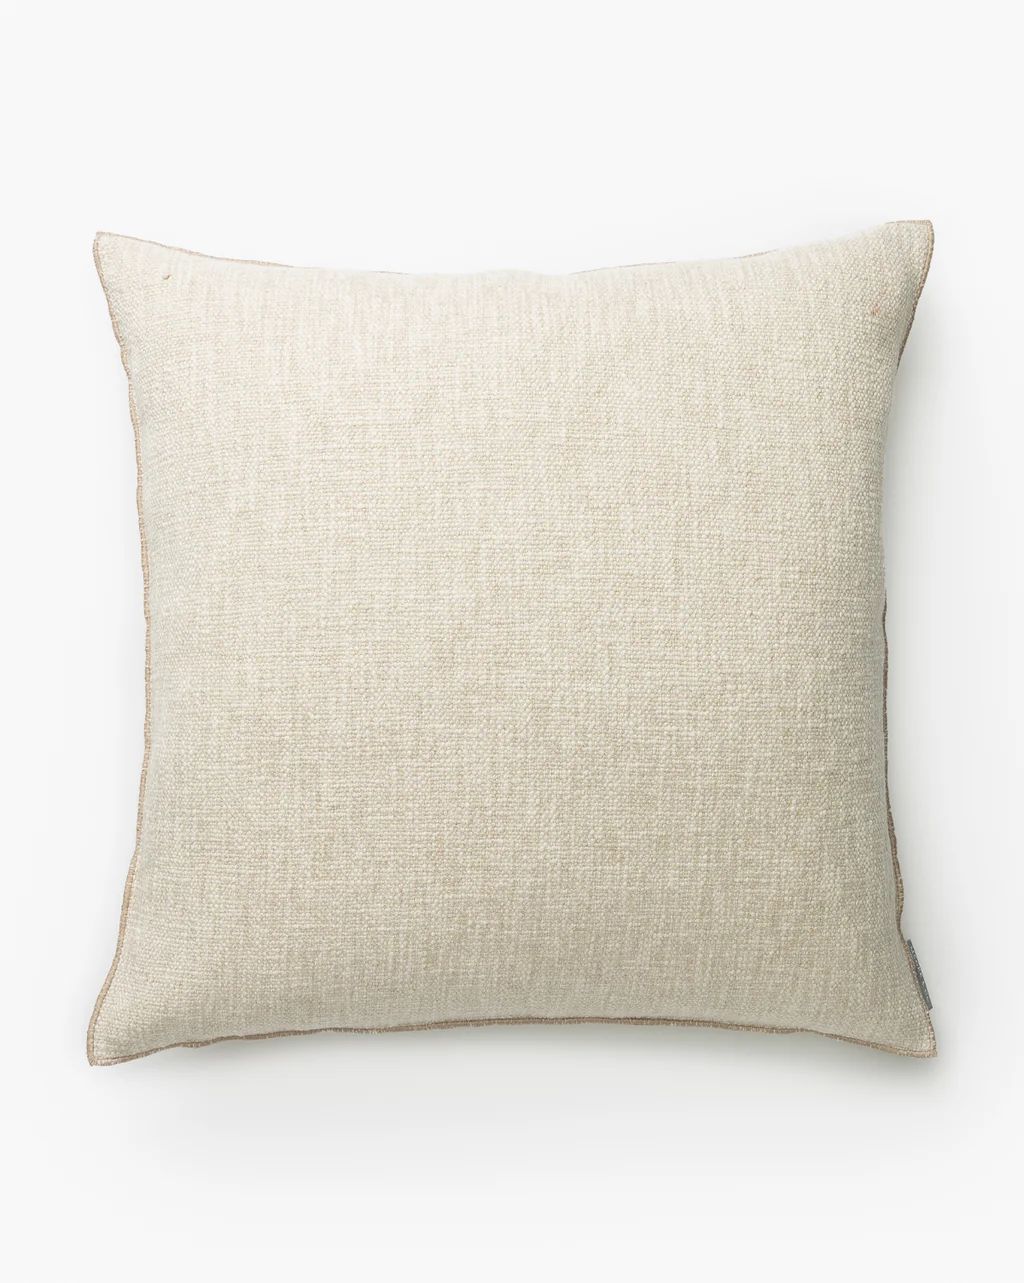 Sia Pillow Cover | McGee & Co.